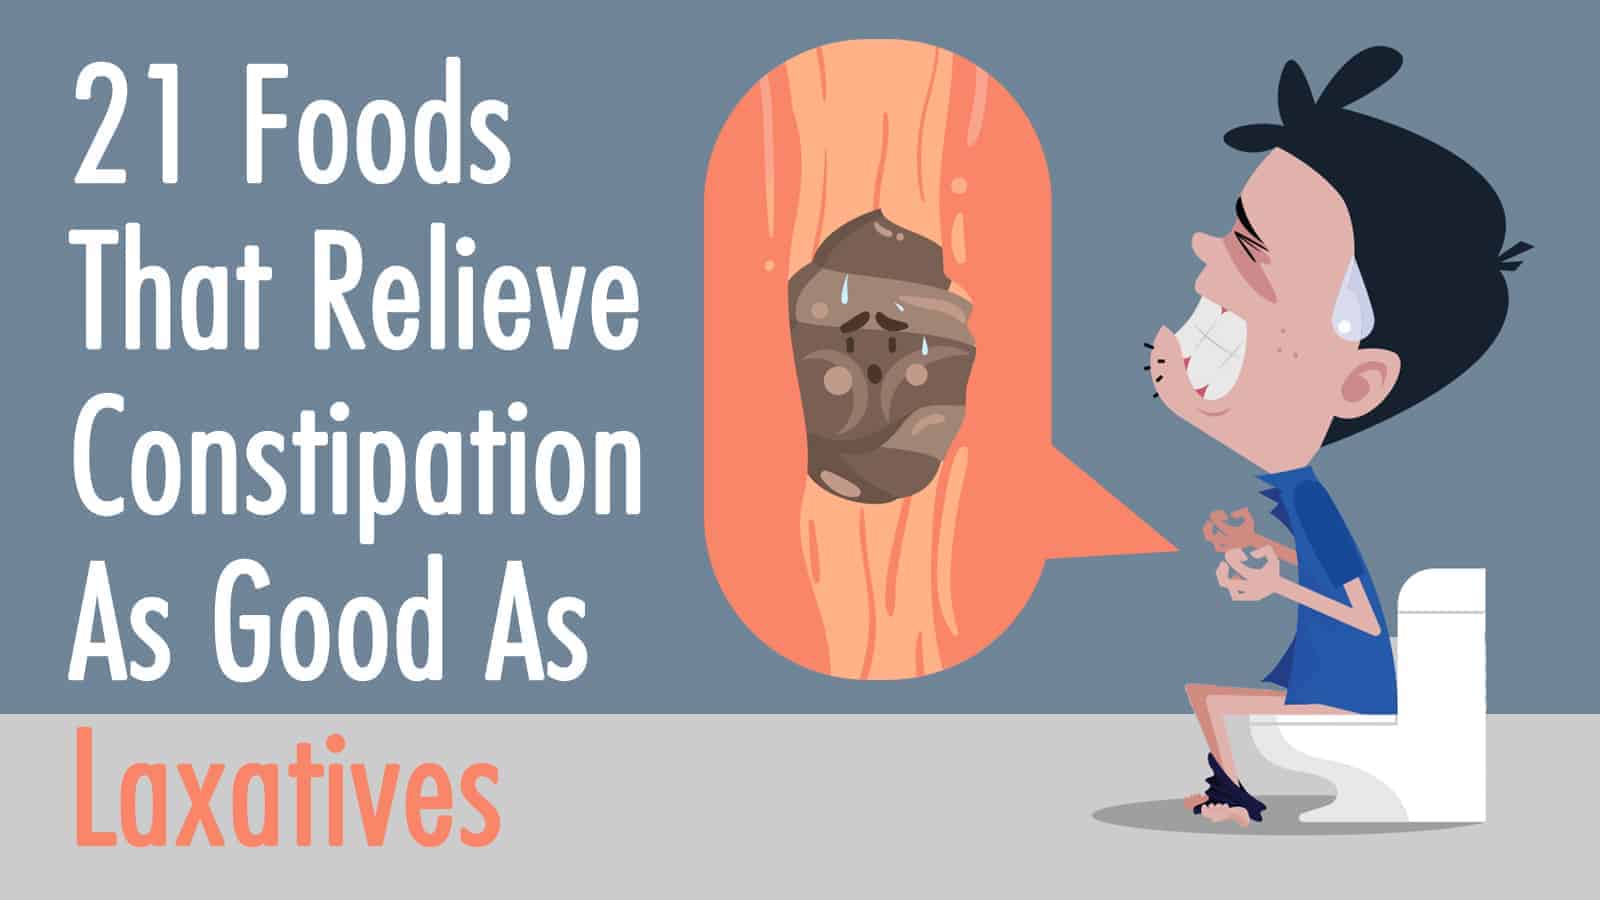 21 Foods That Relieve Constipation As Good As Laxatives